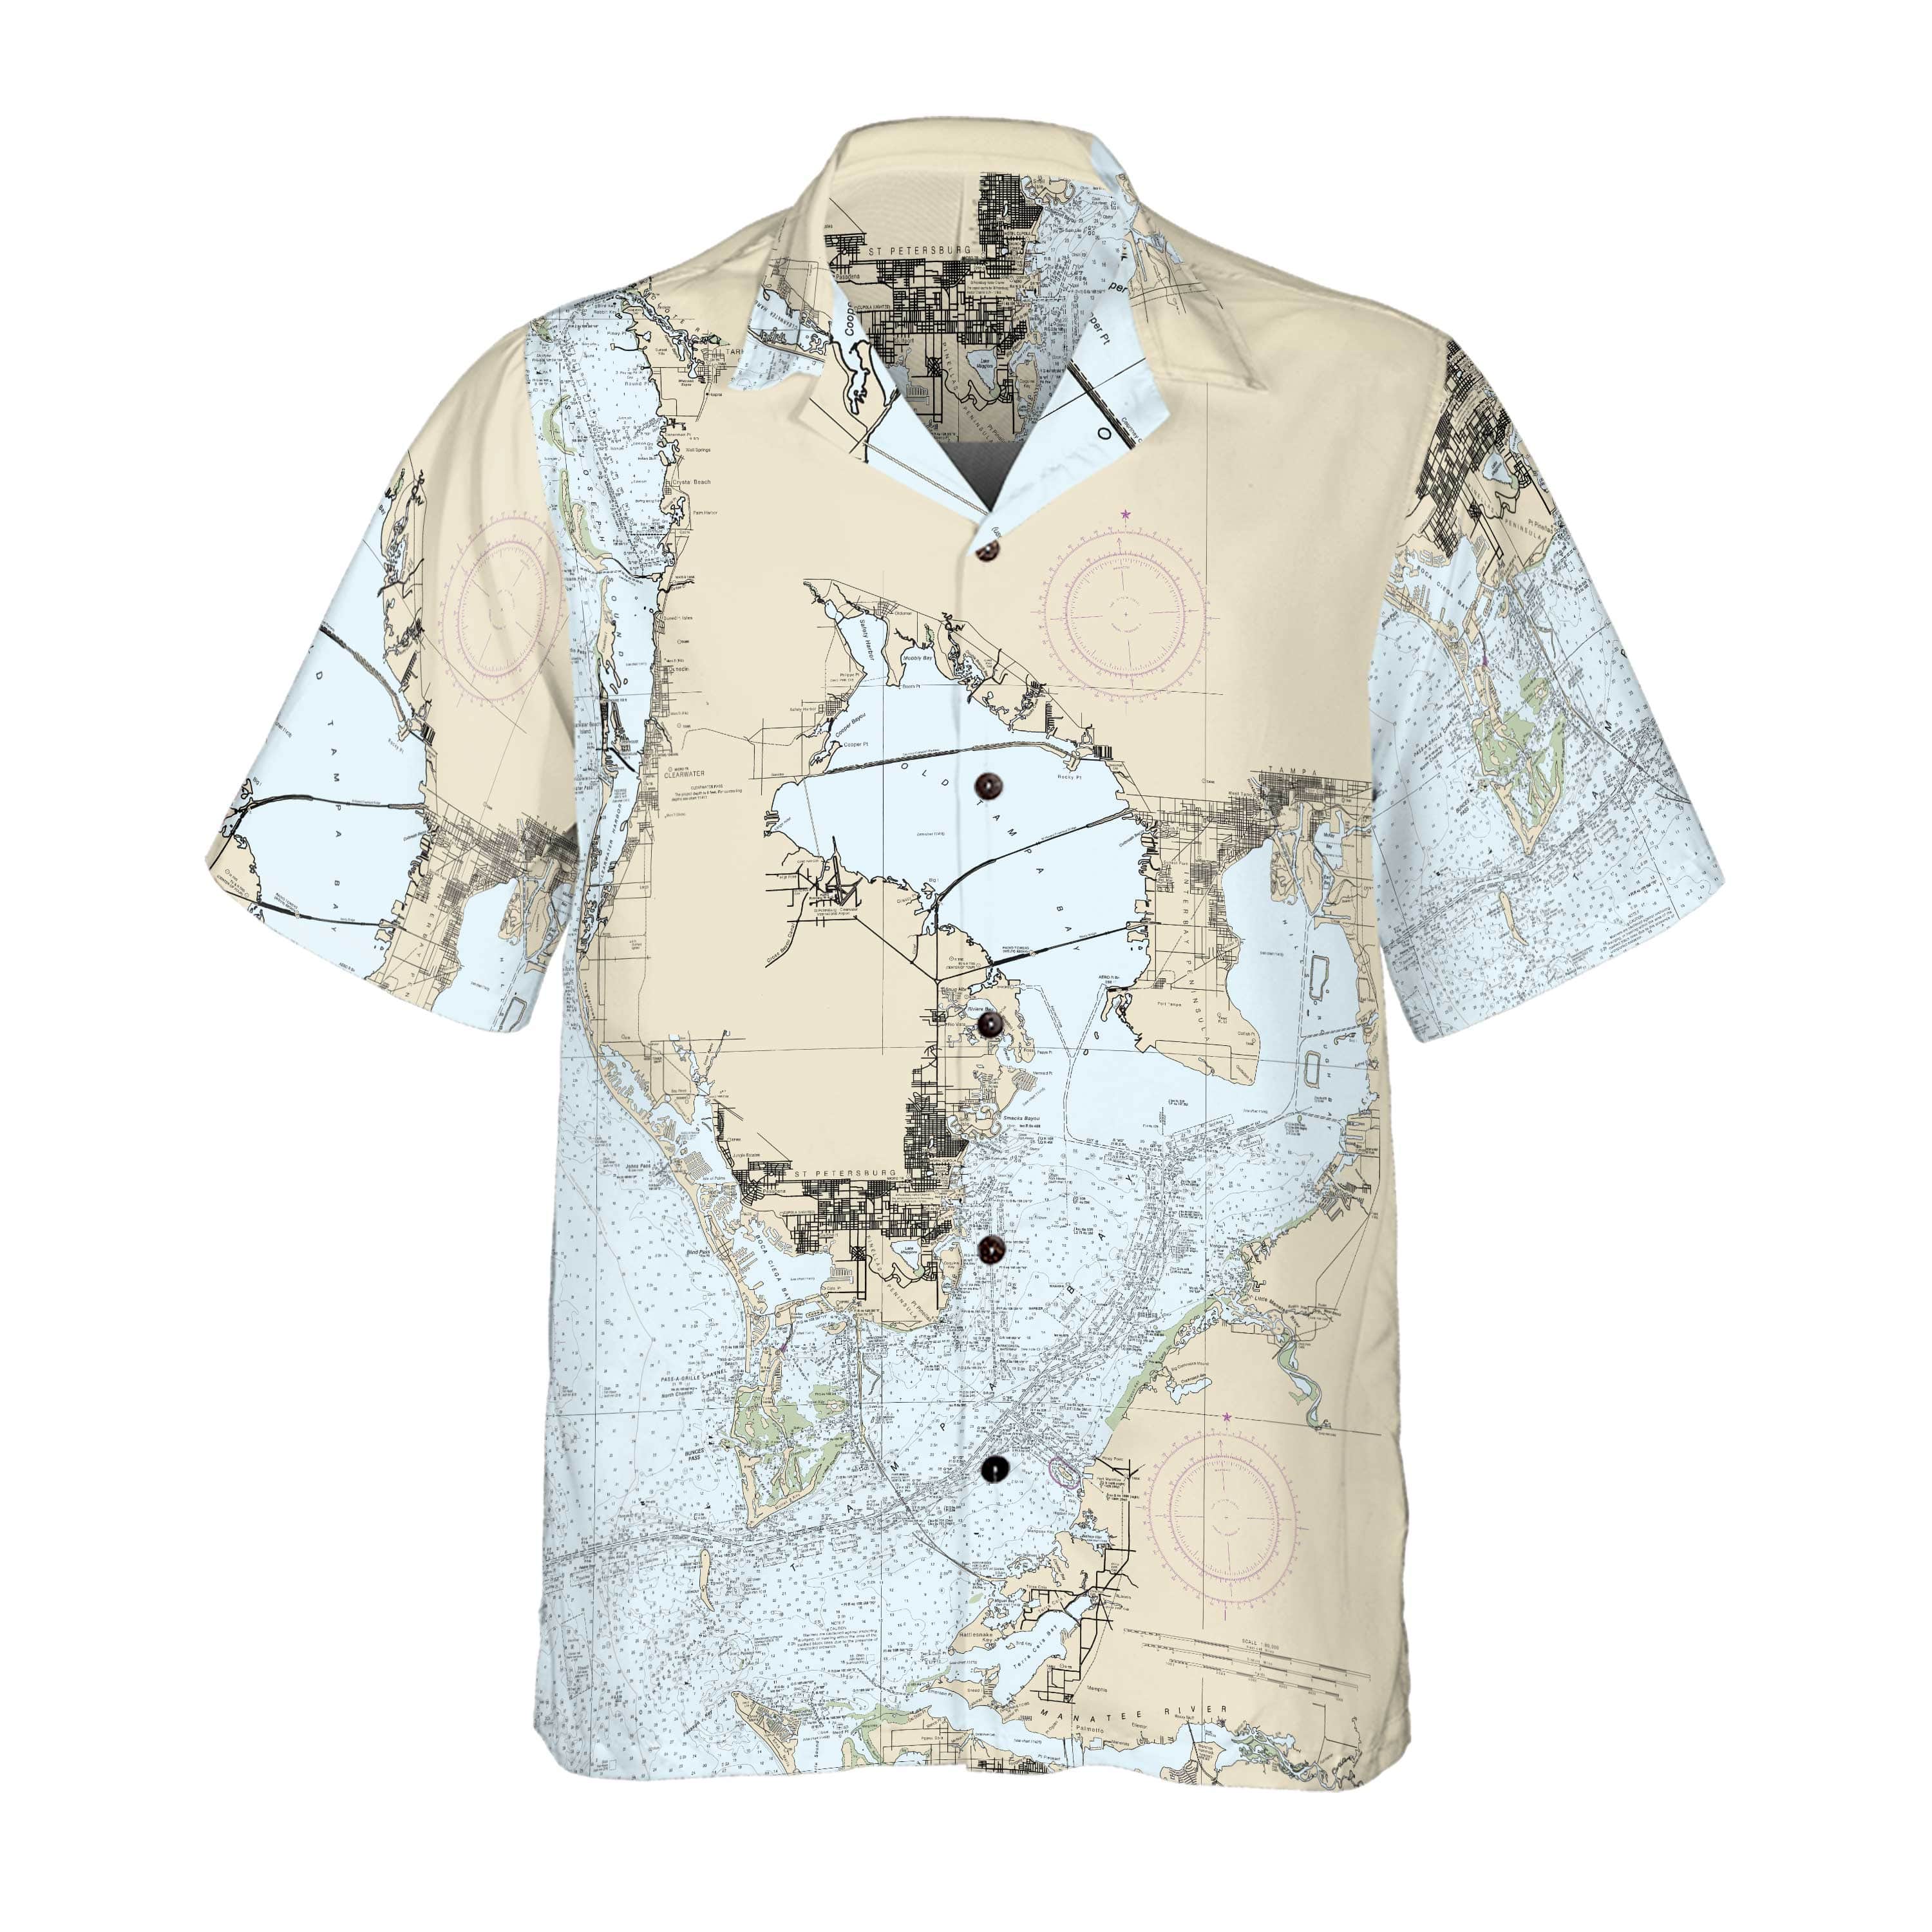 The Tampa Bay Coconut Button Camp Shirt